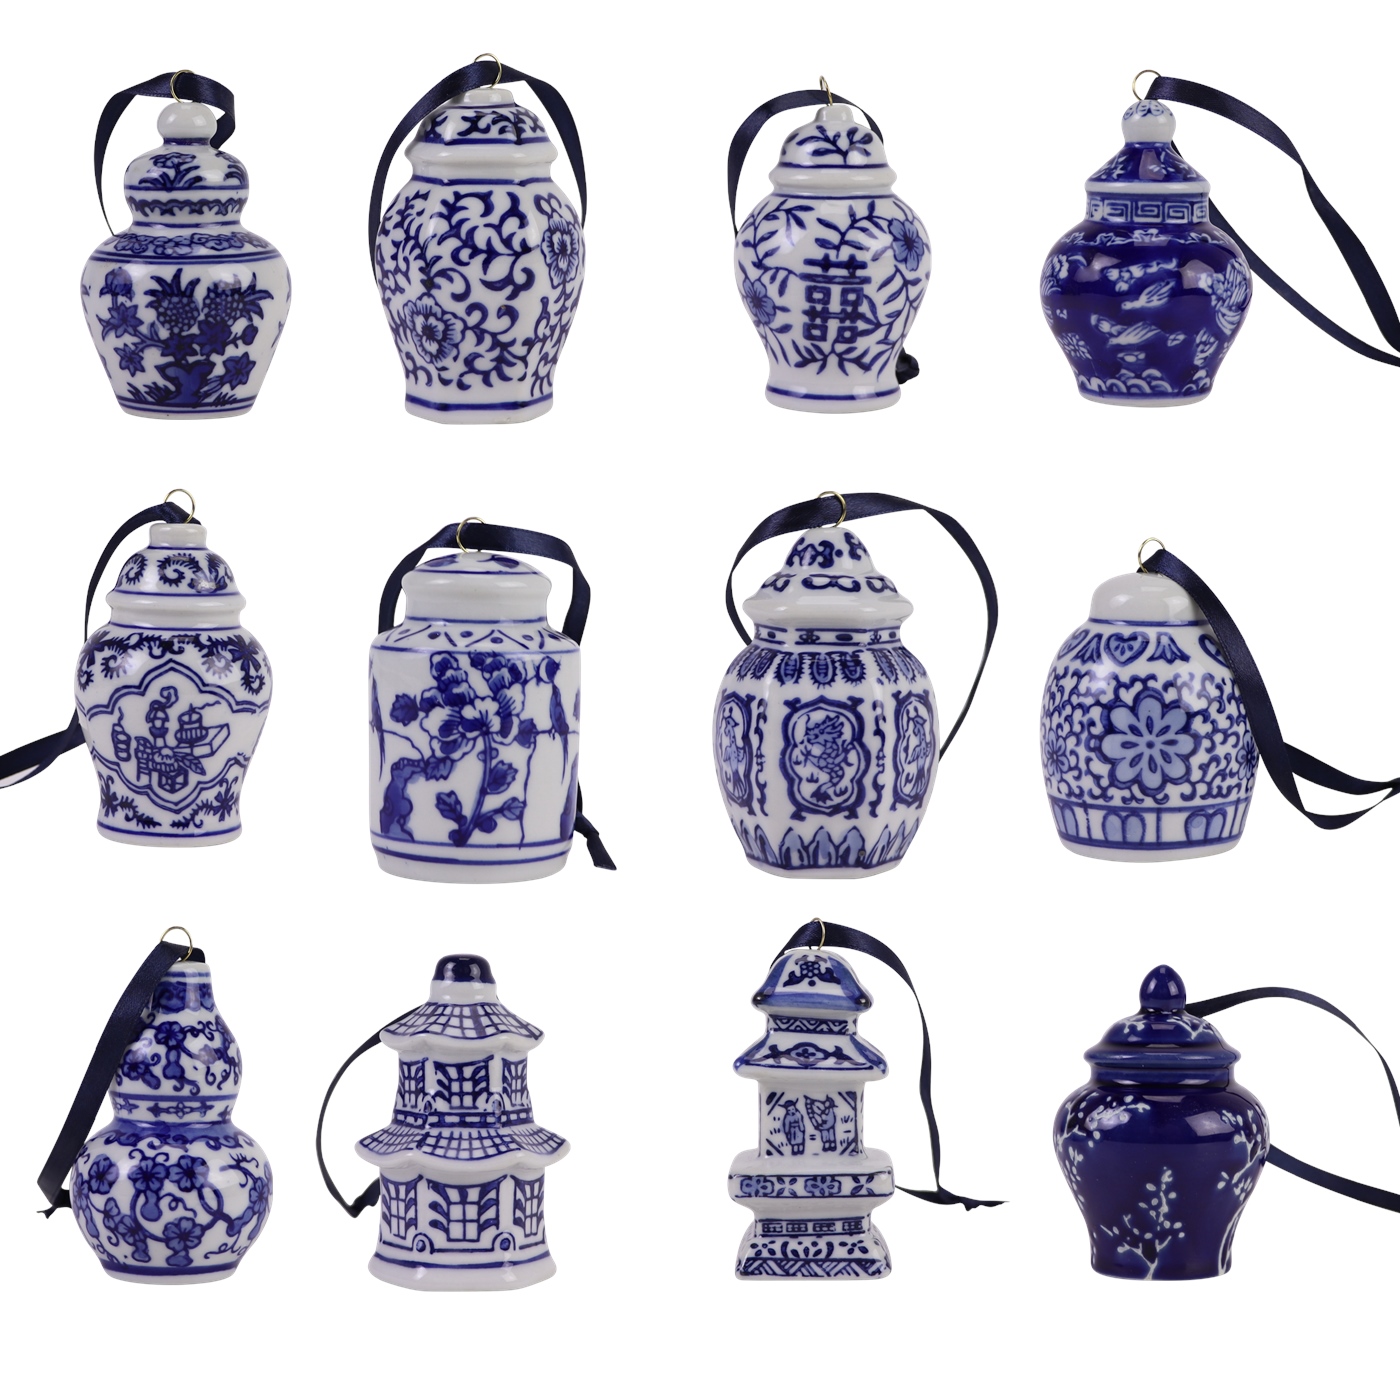 RZTo01-Series blue and white porcelain Ceramic hanging jars combined picture